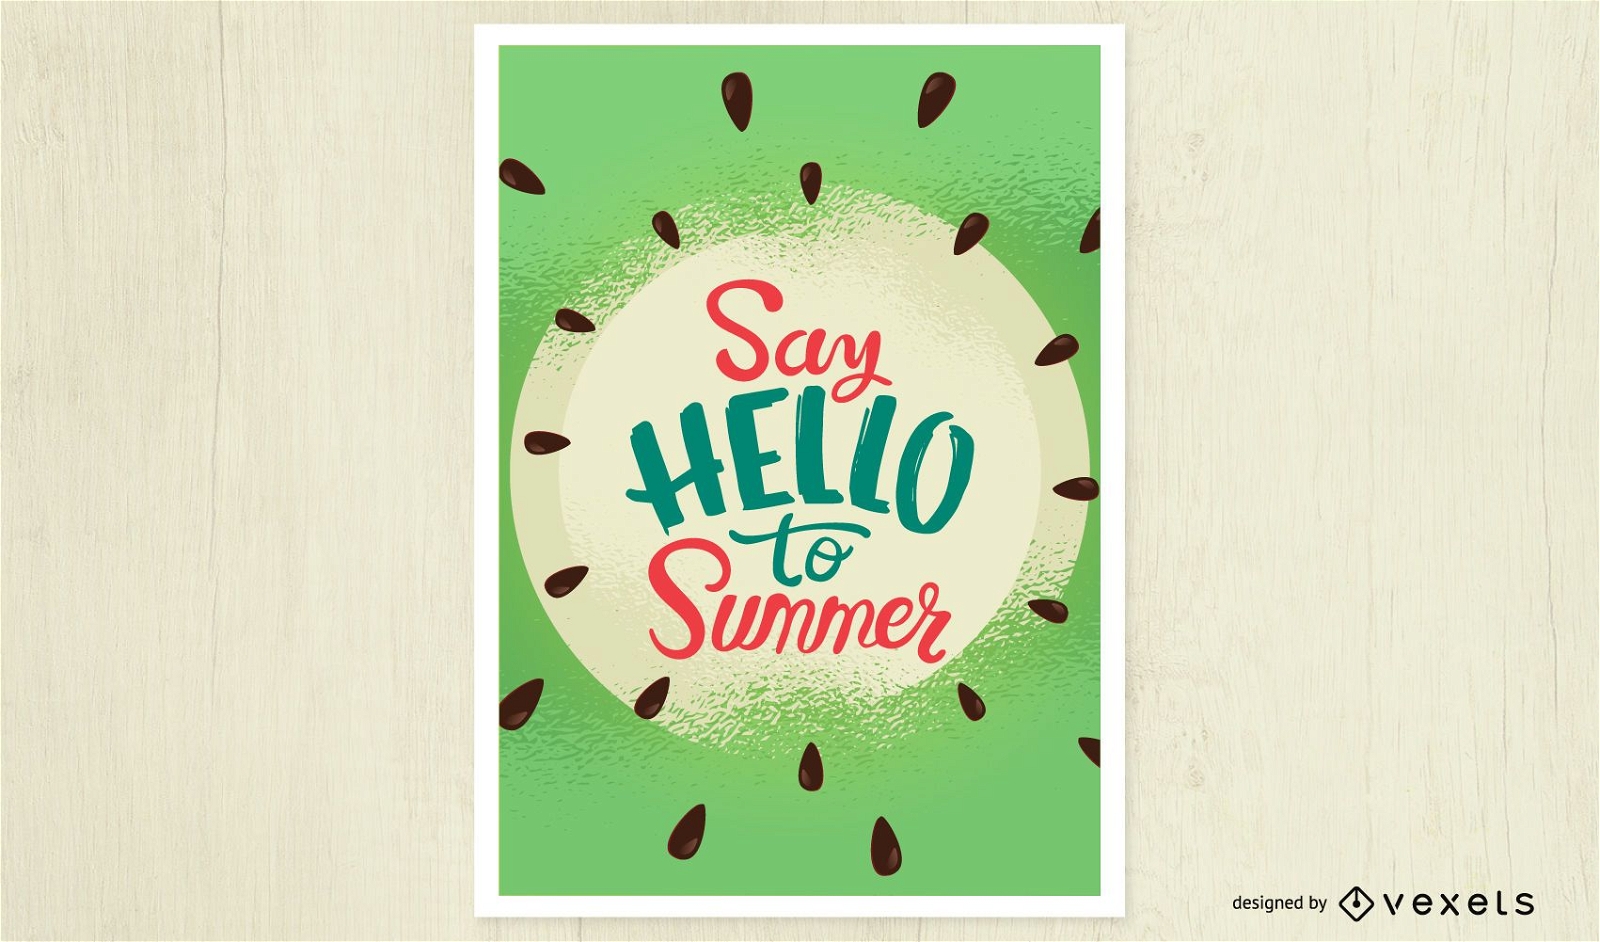 Say hello to summer poster